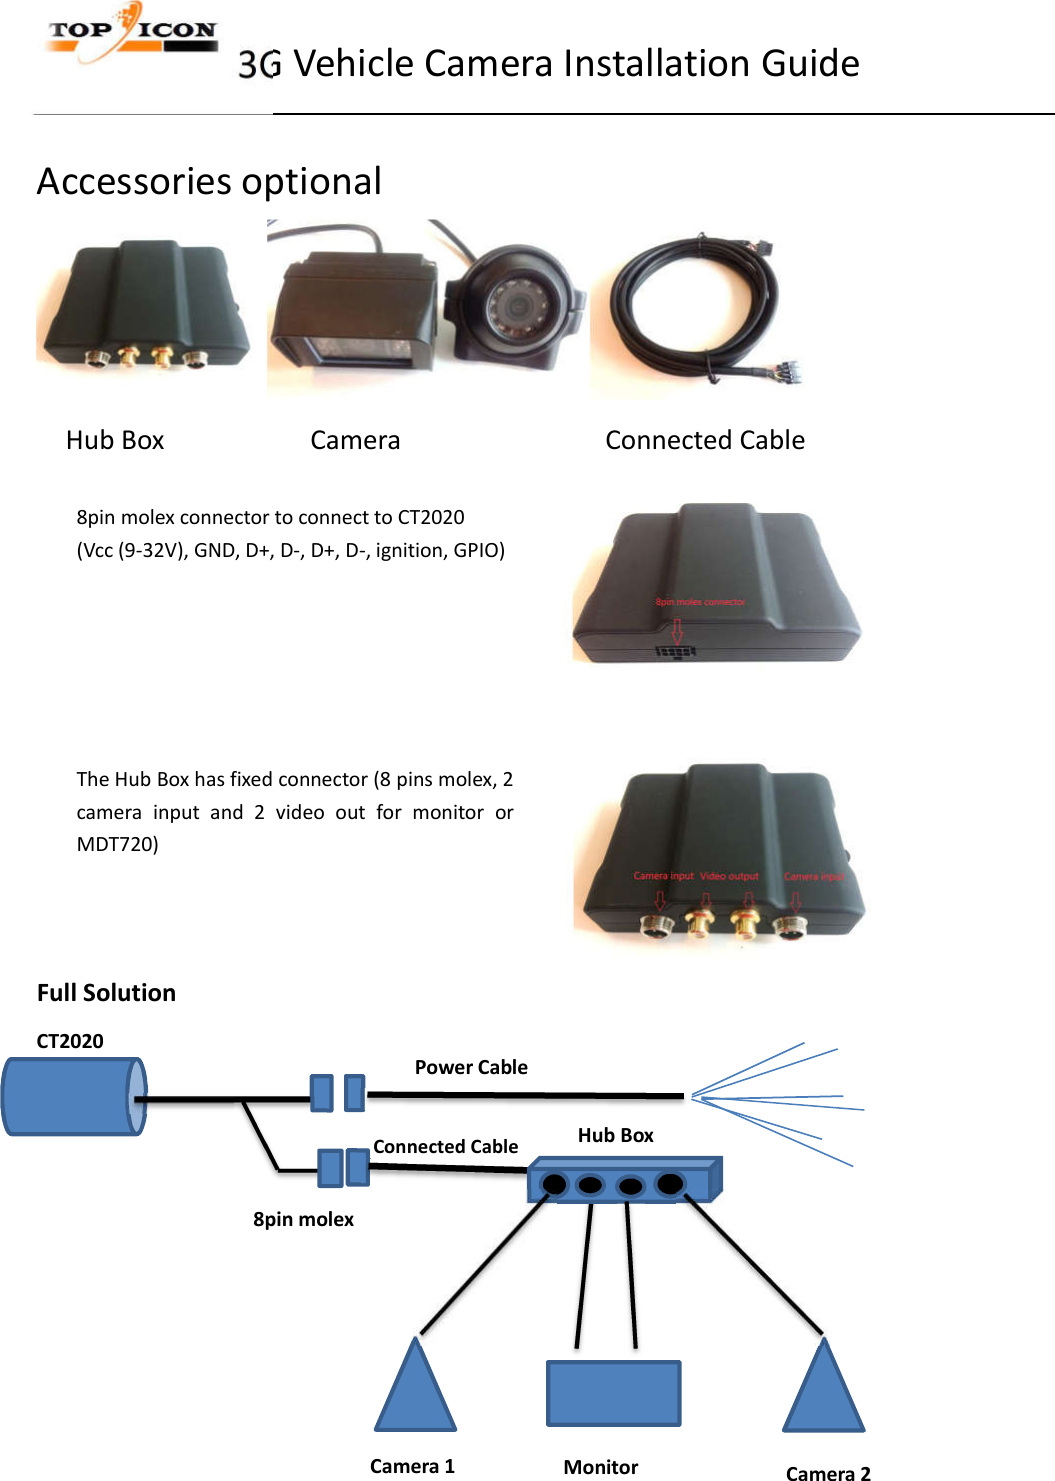 3G Vehicle Camera Installation Guide   Accessories optional    Hub Box                    Camera                            Connected Cable                  Full Solution   CT2020  Camera 1  Camera 2 Monitor Hub Box   8pin molex connector to connect to CT2020   (Vcc (9-32V), GND, D+, D-, D+, D-, ignition, GPIO)   The Hub Box has fixed connector (8 pins molex, 2 camera  input  and  2  video  out  for  monitor  or MDT720)   Connected Cable Power Cable 8pin molex   